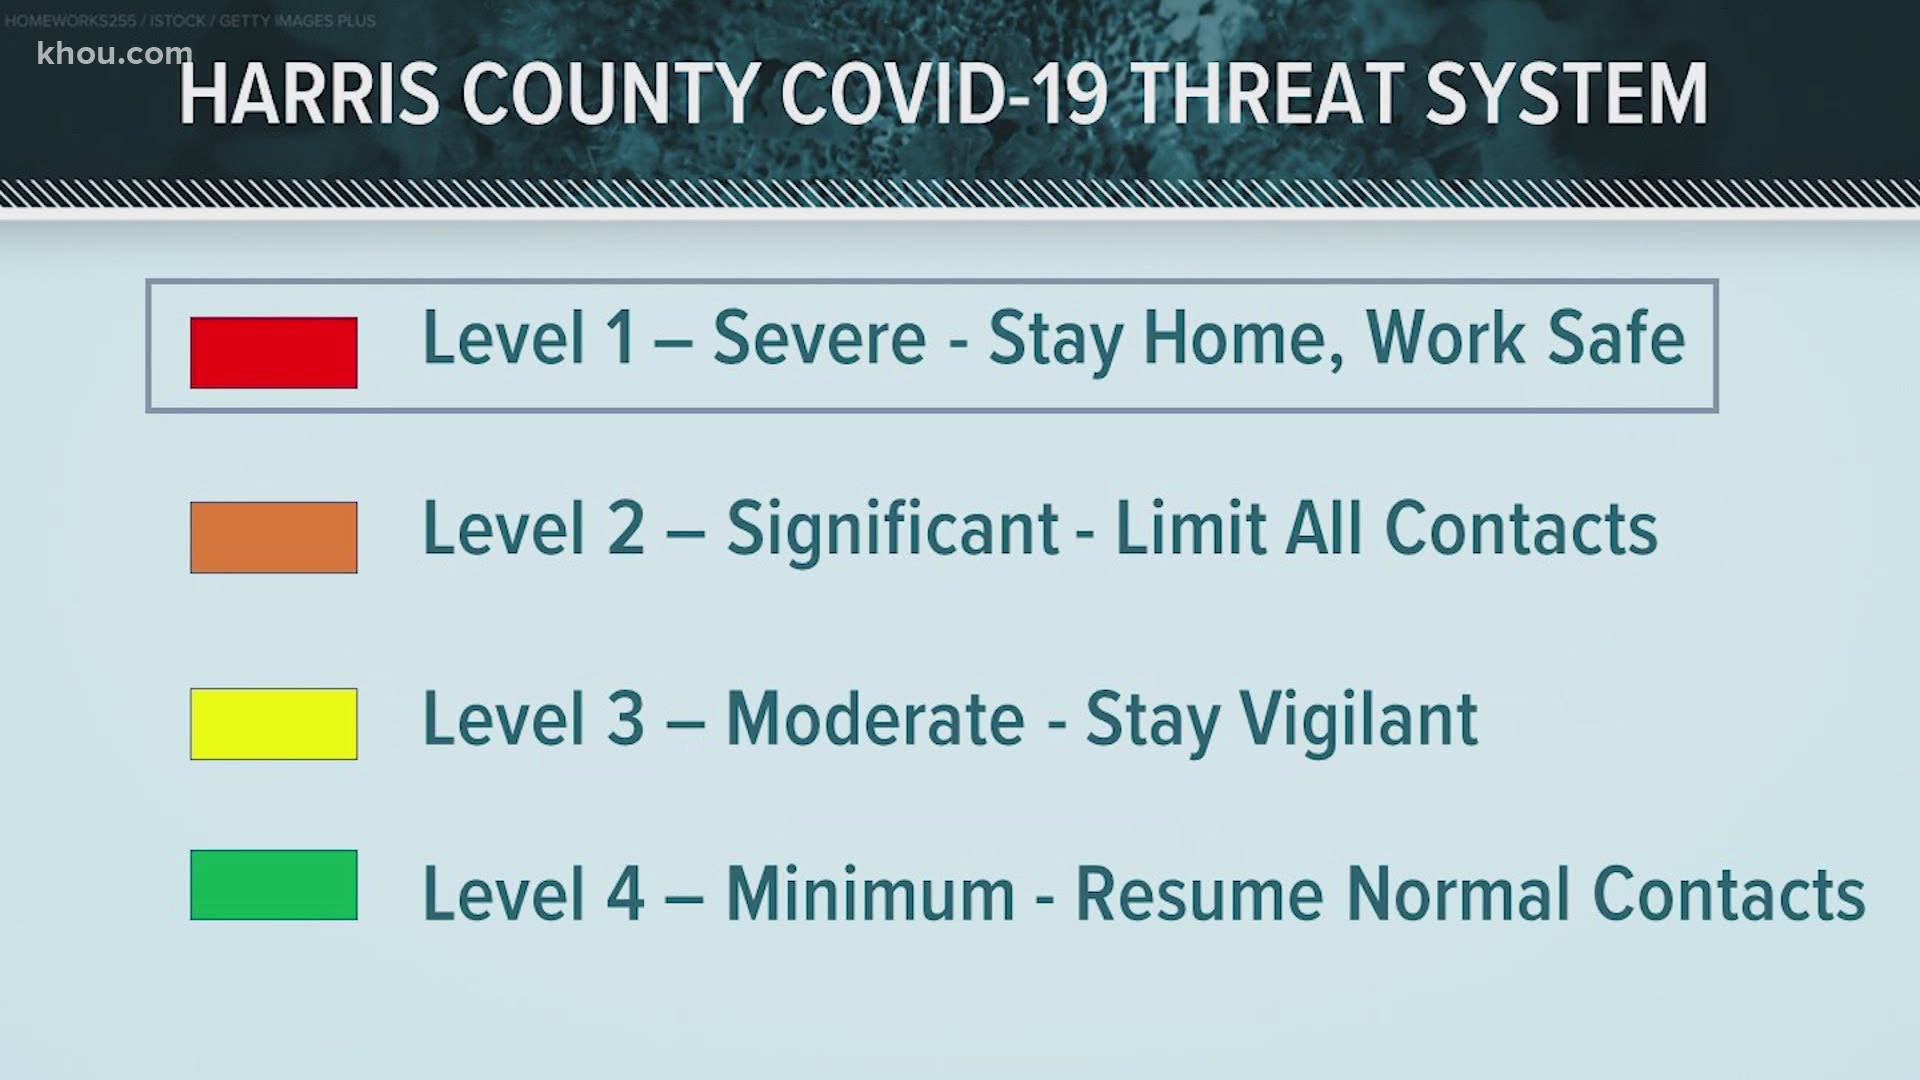 Harris County has moved to the "highest possible threat level" for COVID-19, prompting County Judge Lina Hidalgo to issue a new Stay Home Work Safe advisory.